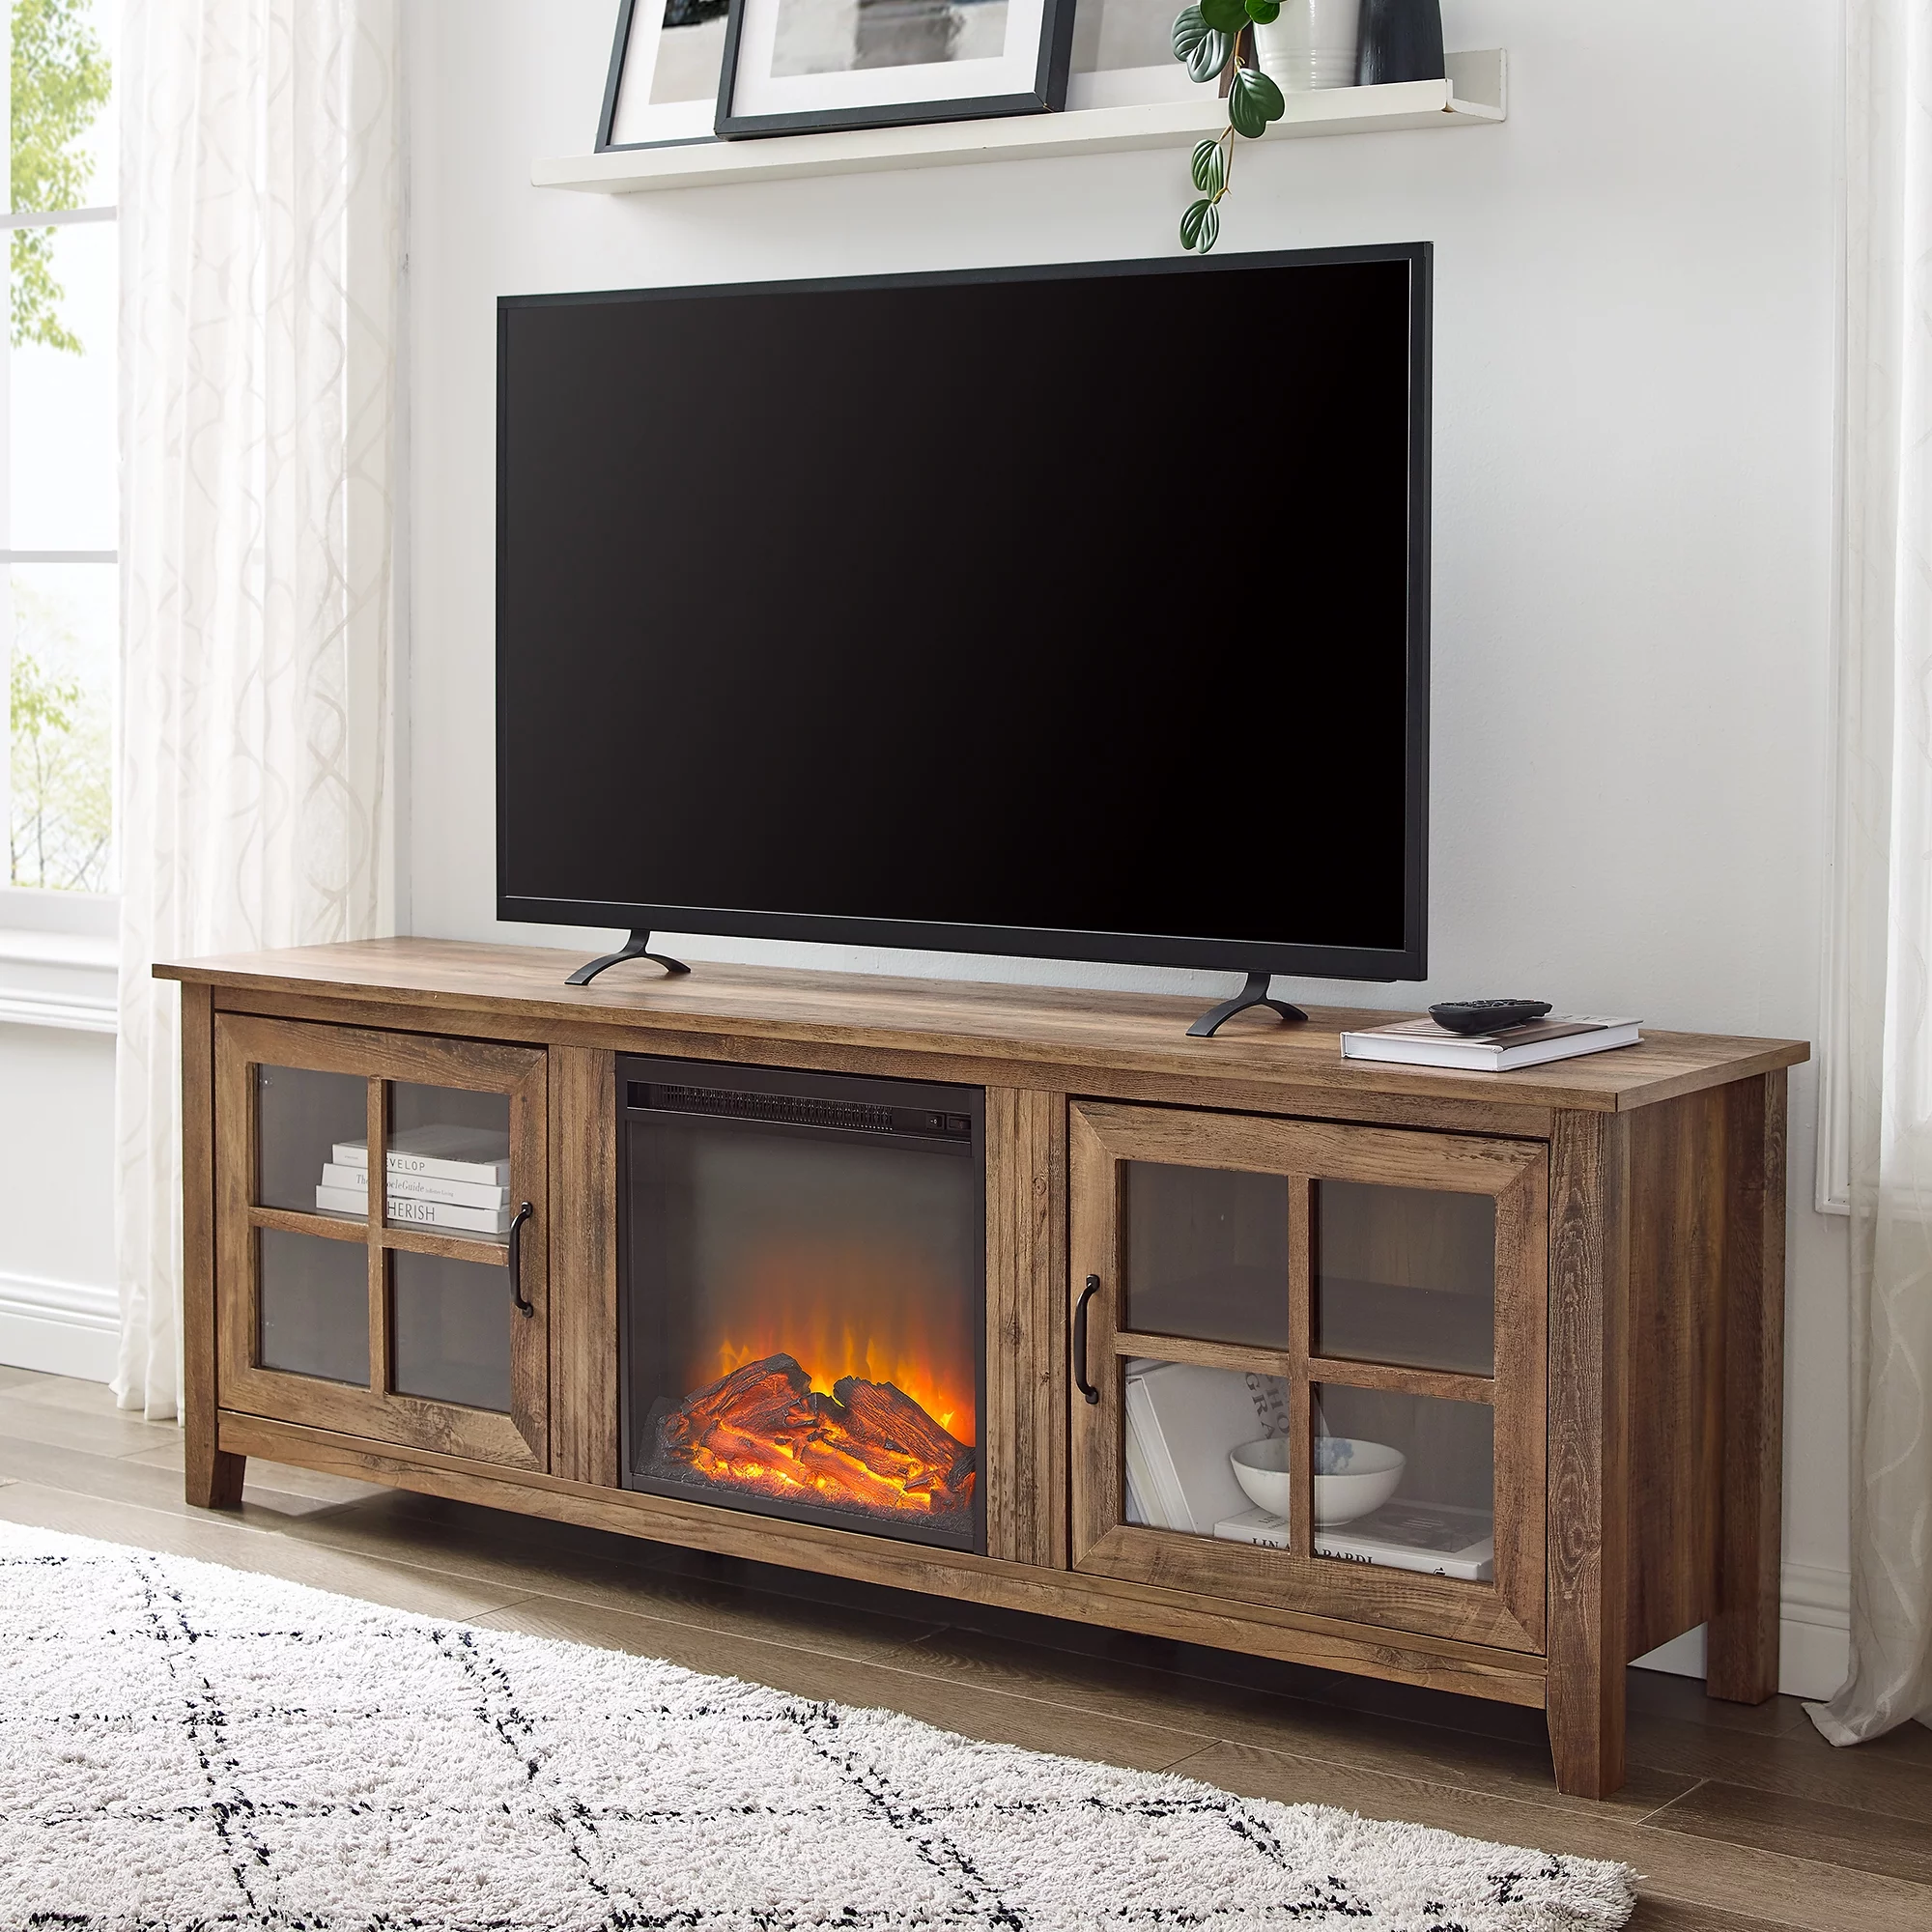 Manor Park Farmhouse Fireplace TV Stand for TVs Up to 80", Reclaimed Barnwood